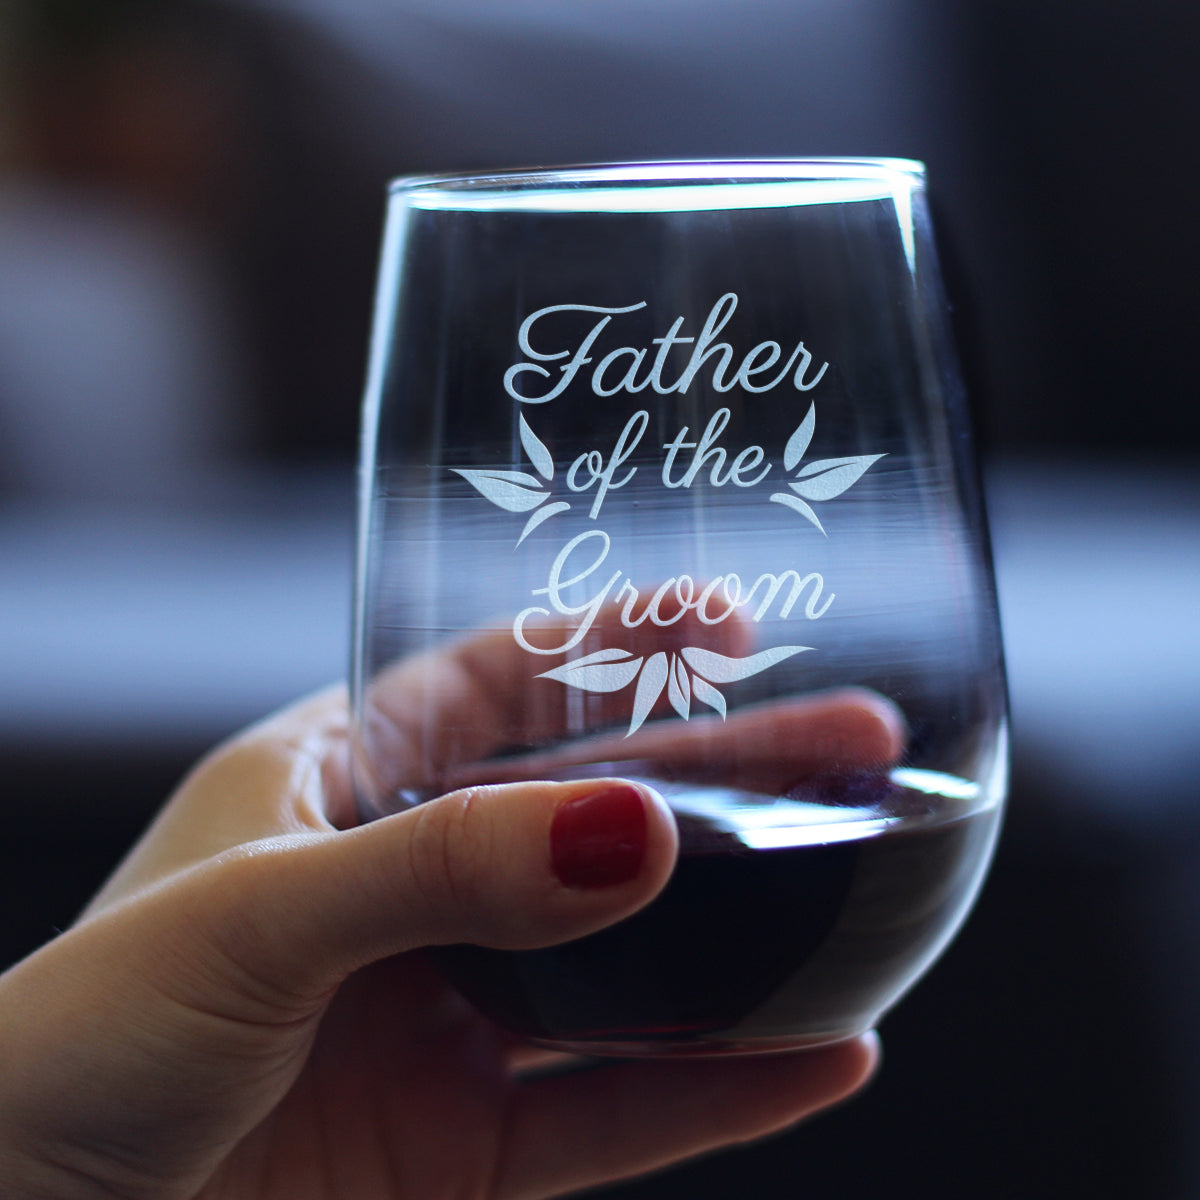 Father of the Groom Stemless Wine Glass - Unique Wedding Gift for Soon to be Father-in-Law - Cute Engraved Wedding Cup Gift